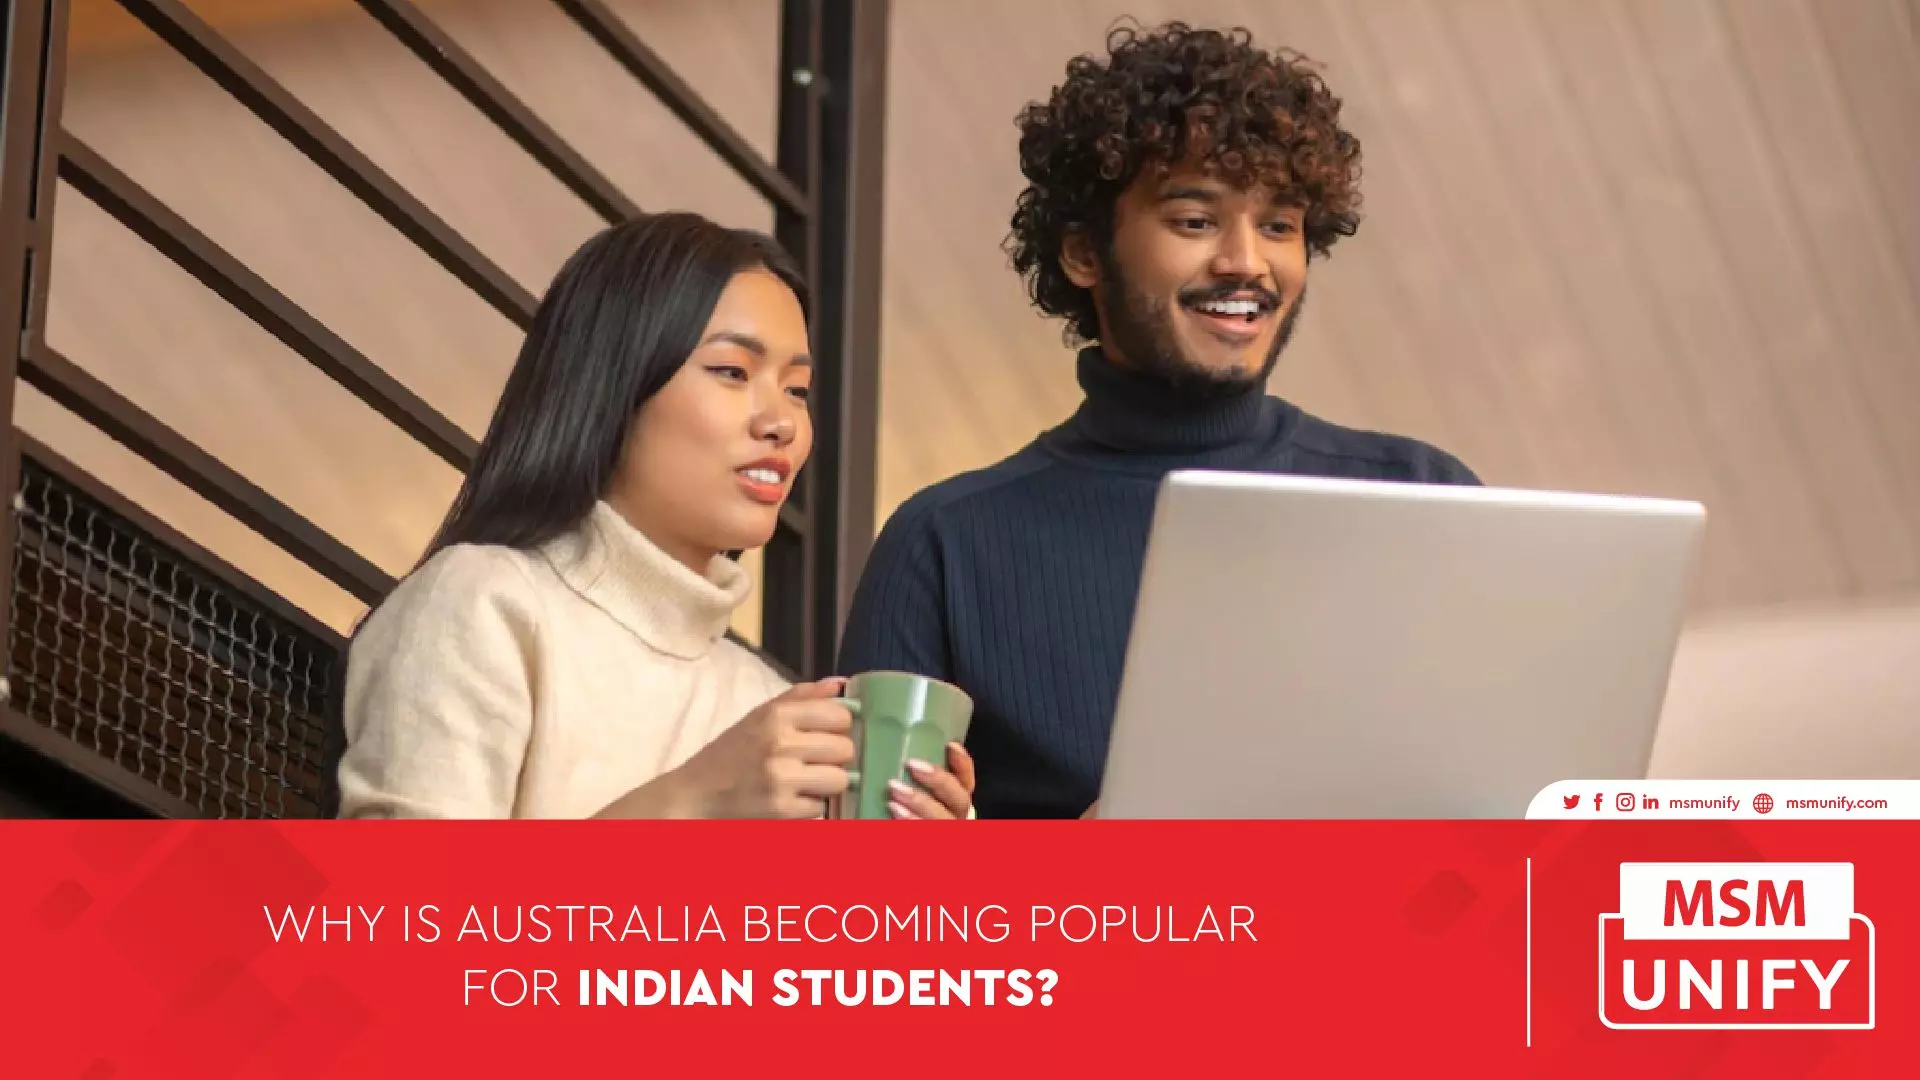 011323 MSM Unify Why is Australia Becoming Popular for Indian Students 01